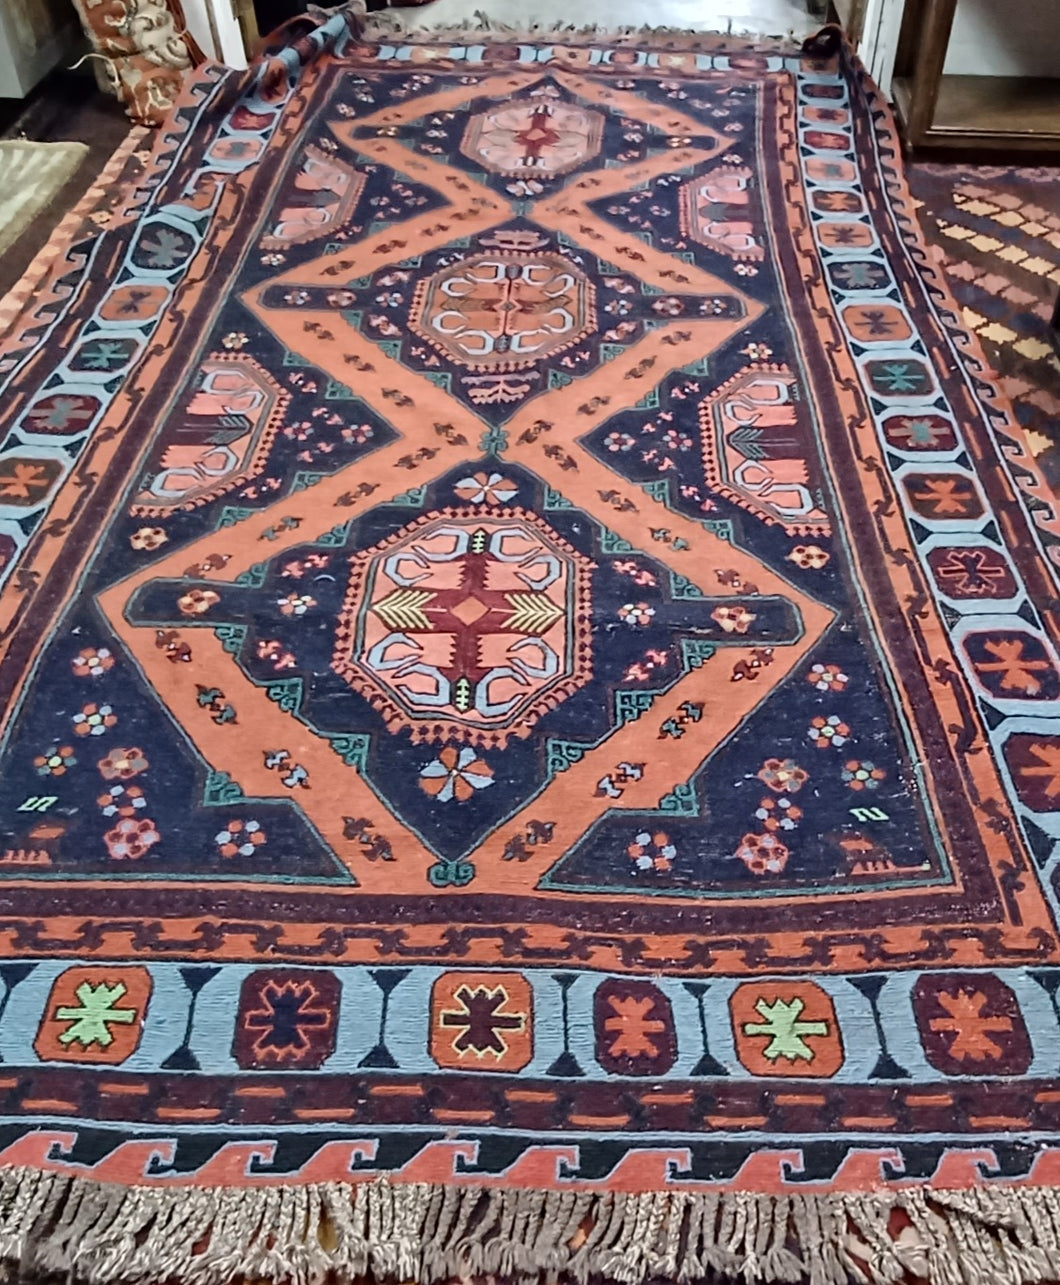 Gorgeous Colorful Russian Somack RUG